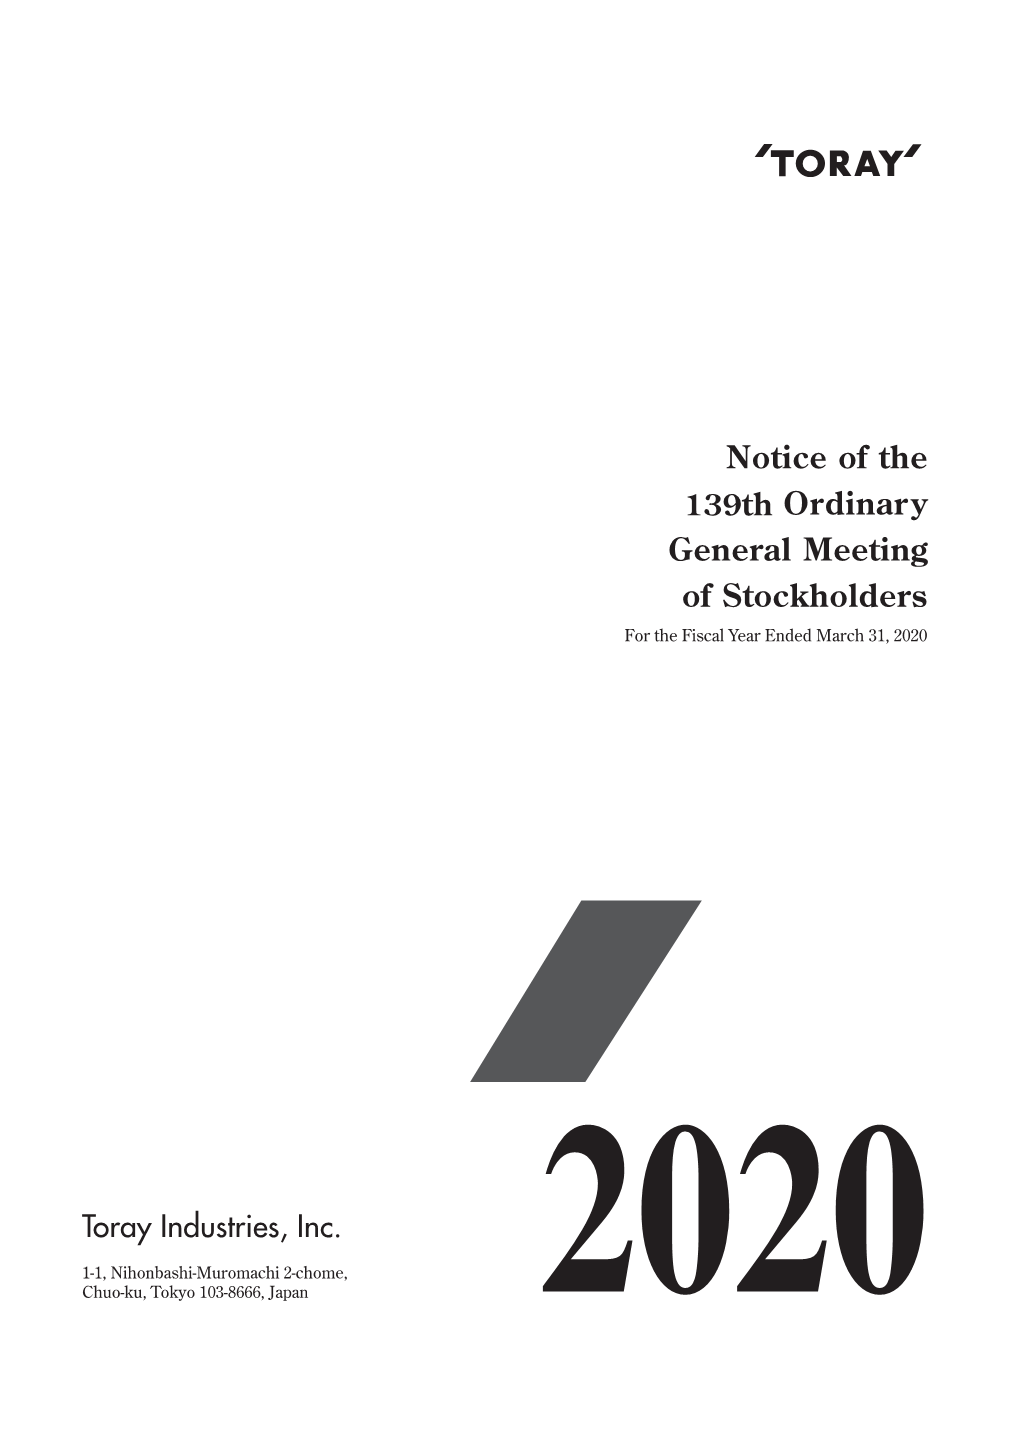 Notice of the 139Th Ordinary General Meeting of Stockholders June 2020